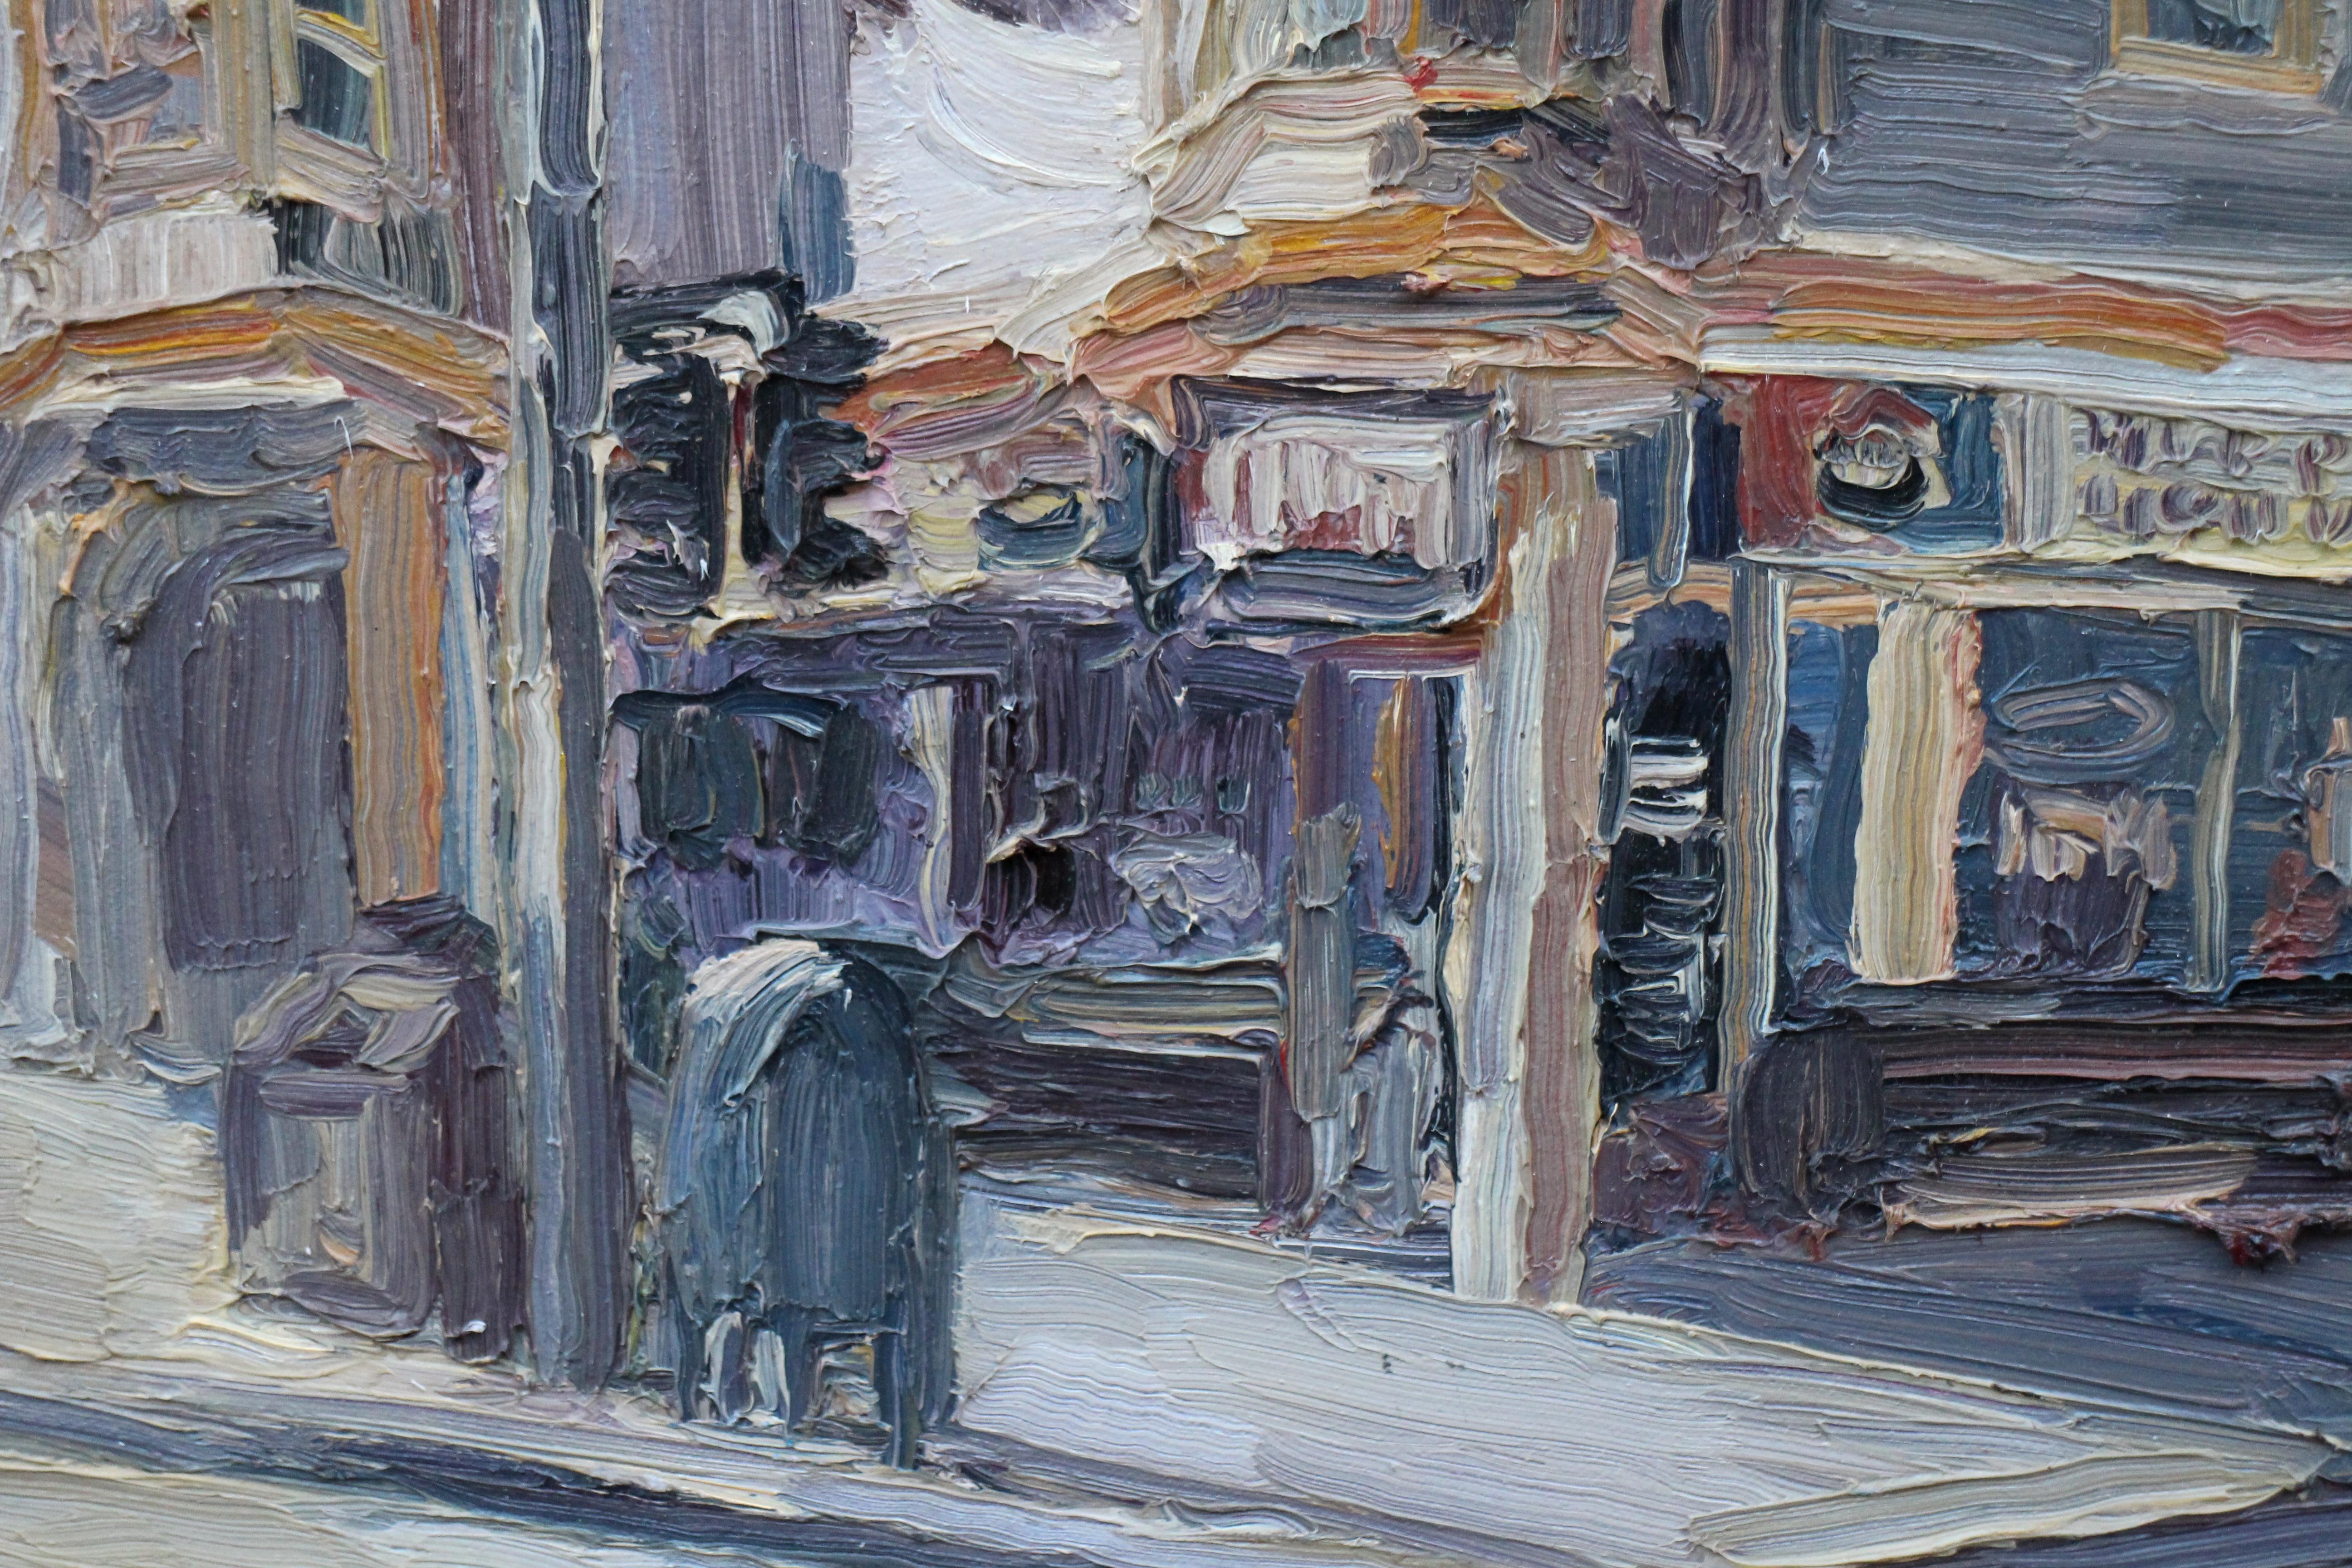 6th & California, San Fransisco, Painting, Oil on Canvas 4